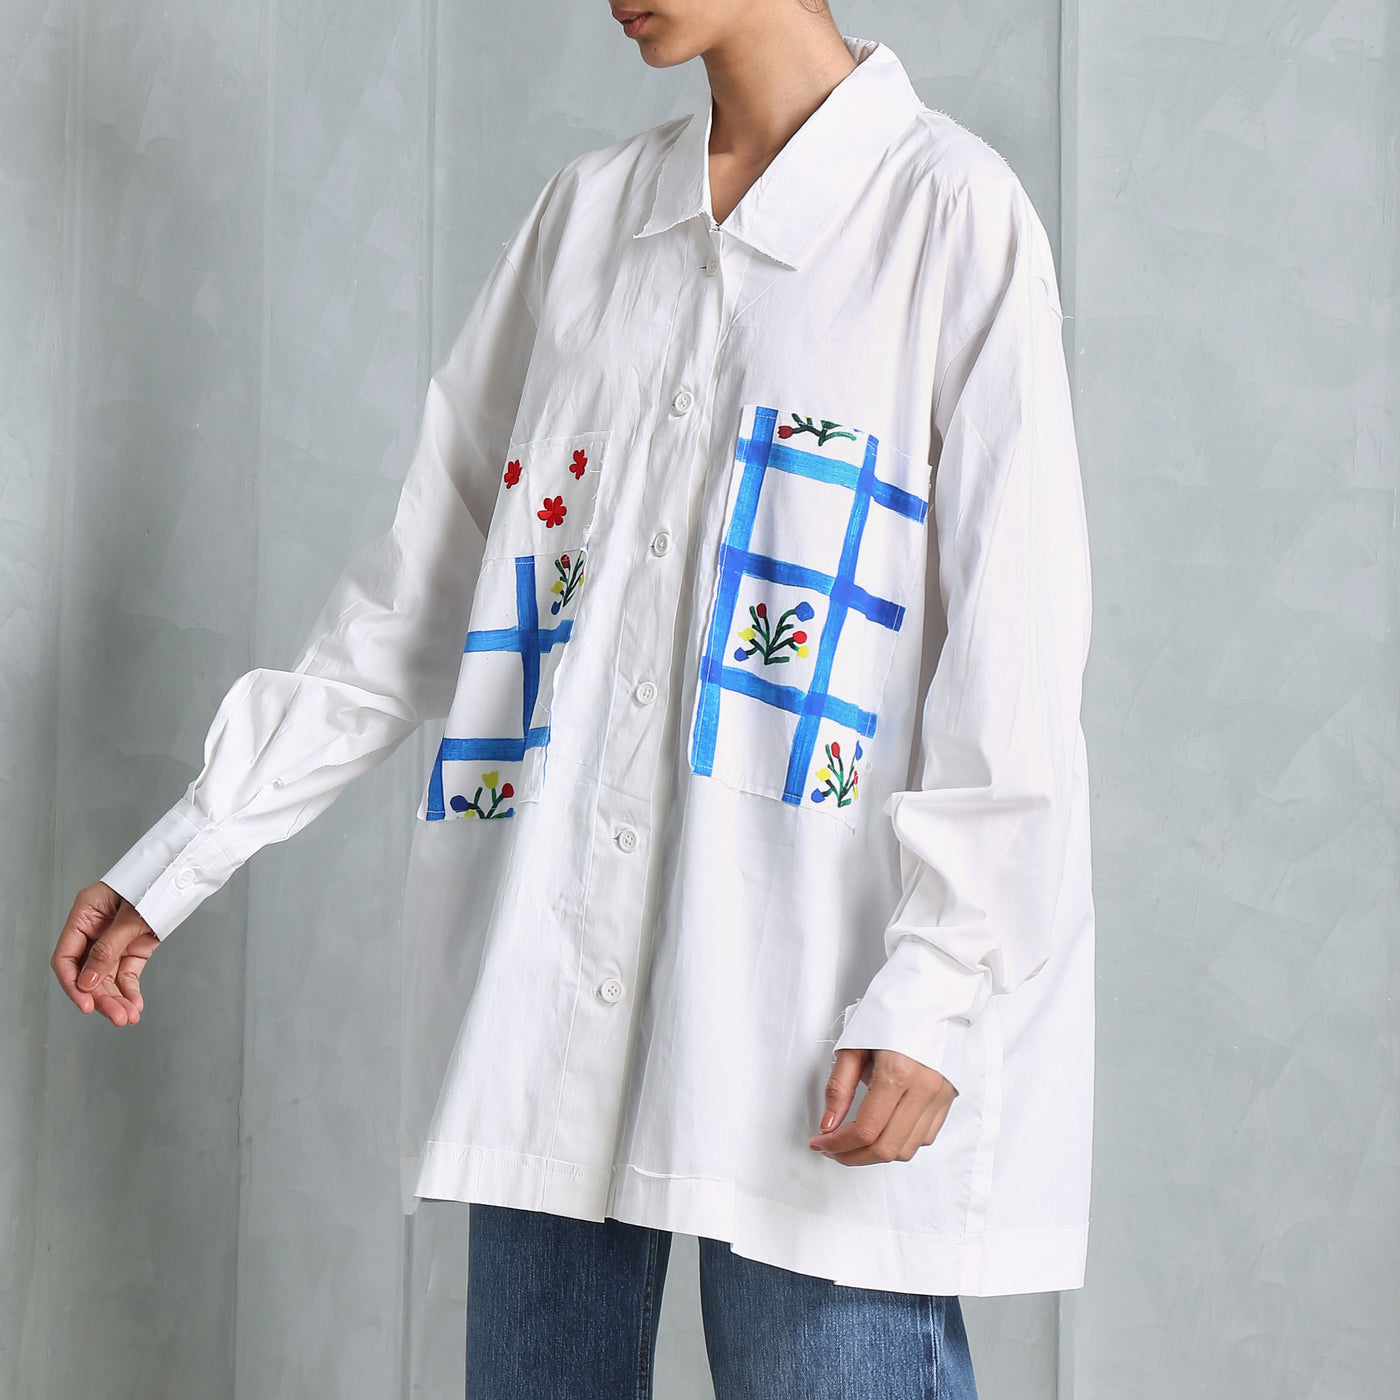 Happi Space Patched Shirt with ollard neck, oversized fit and long sleeves Details 